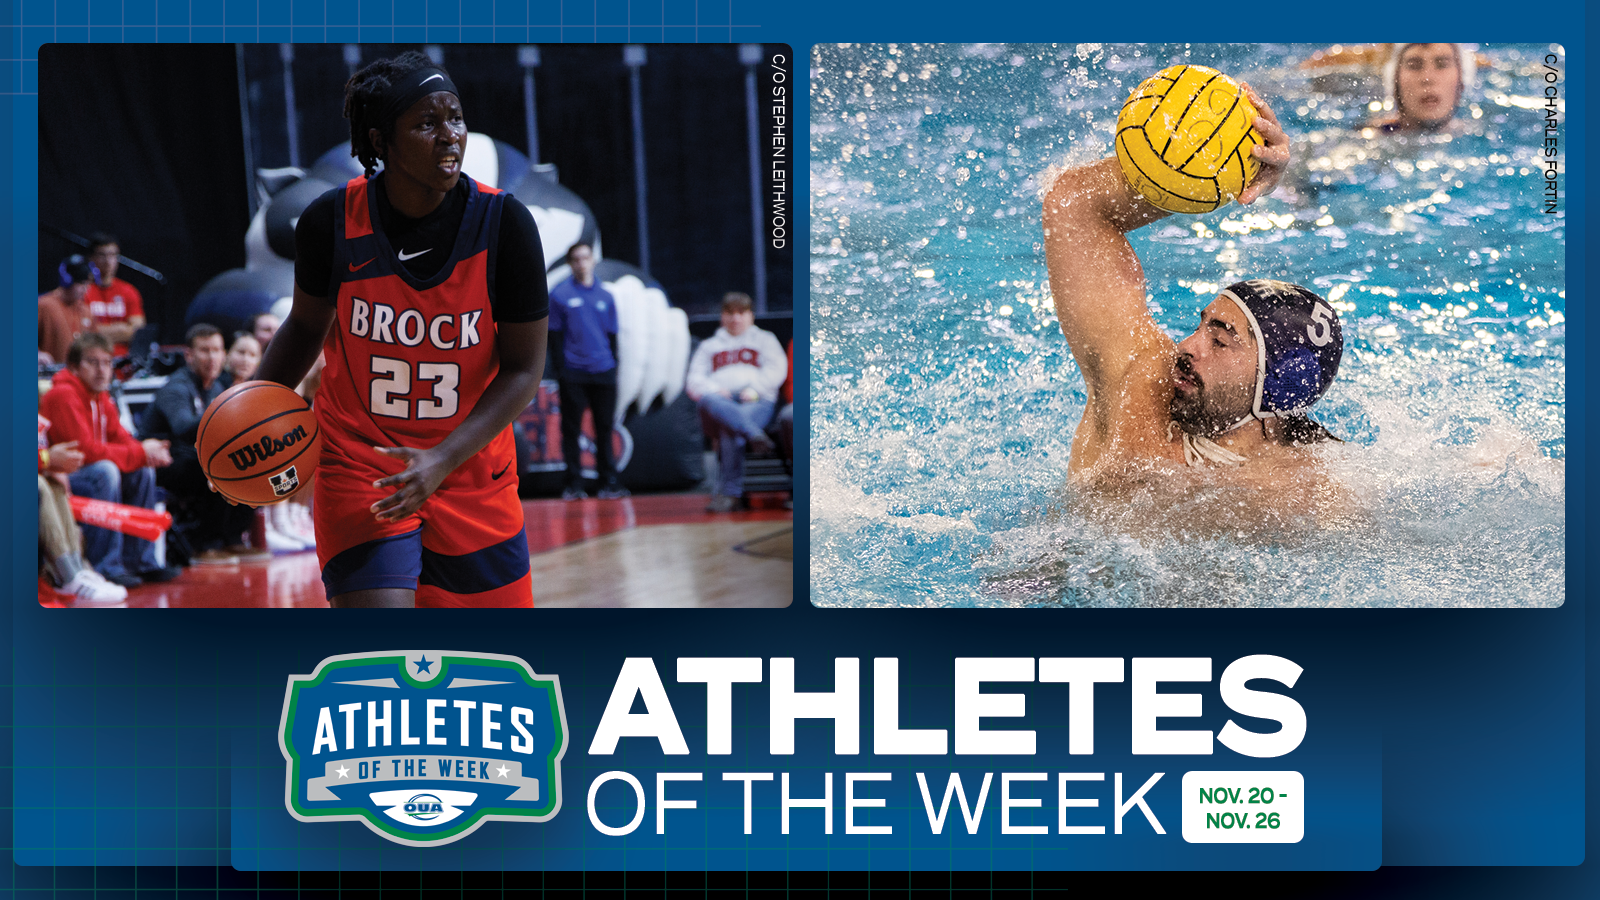 Graphic on predominantly blue background featuring two images. Left image shows women's basketball player in red uniform dribbling down the court. Right image shows man in water with a cap holding a water polo ball in the air above head. Text below images with logo and text that reads Athletes of the Week along with a time period that shows November 20th - November 26th. 